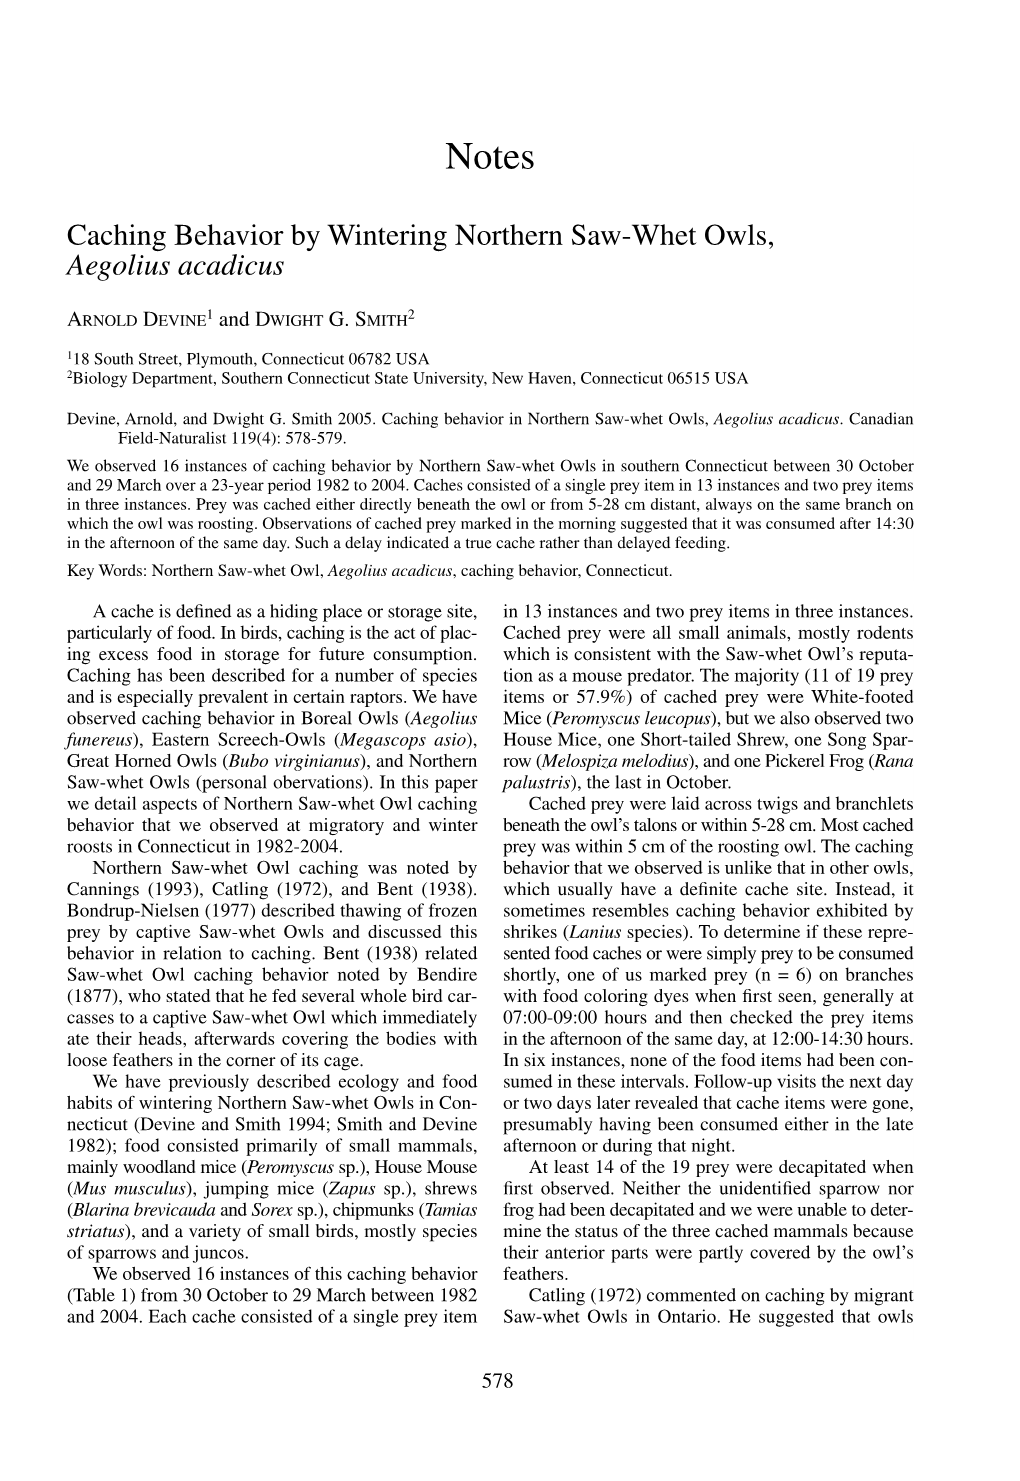 Caching Behavior by Wintering Northern Saw-Whet Owls, Aegolius Acadicus